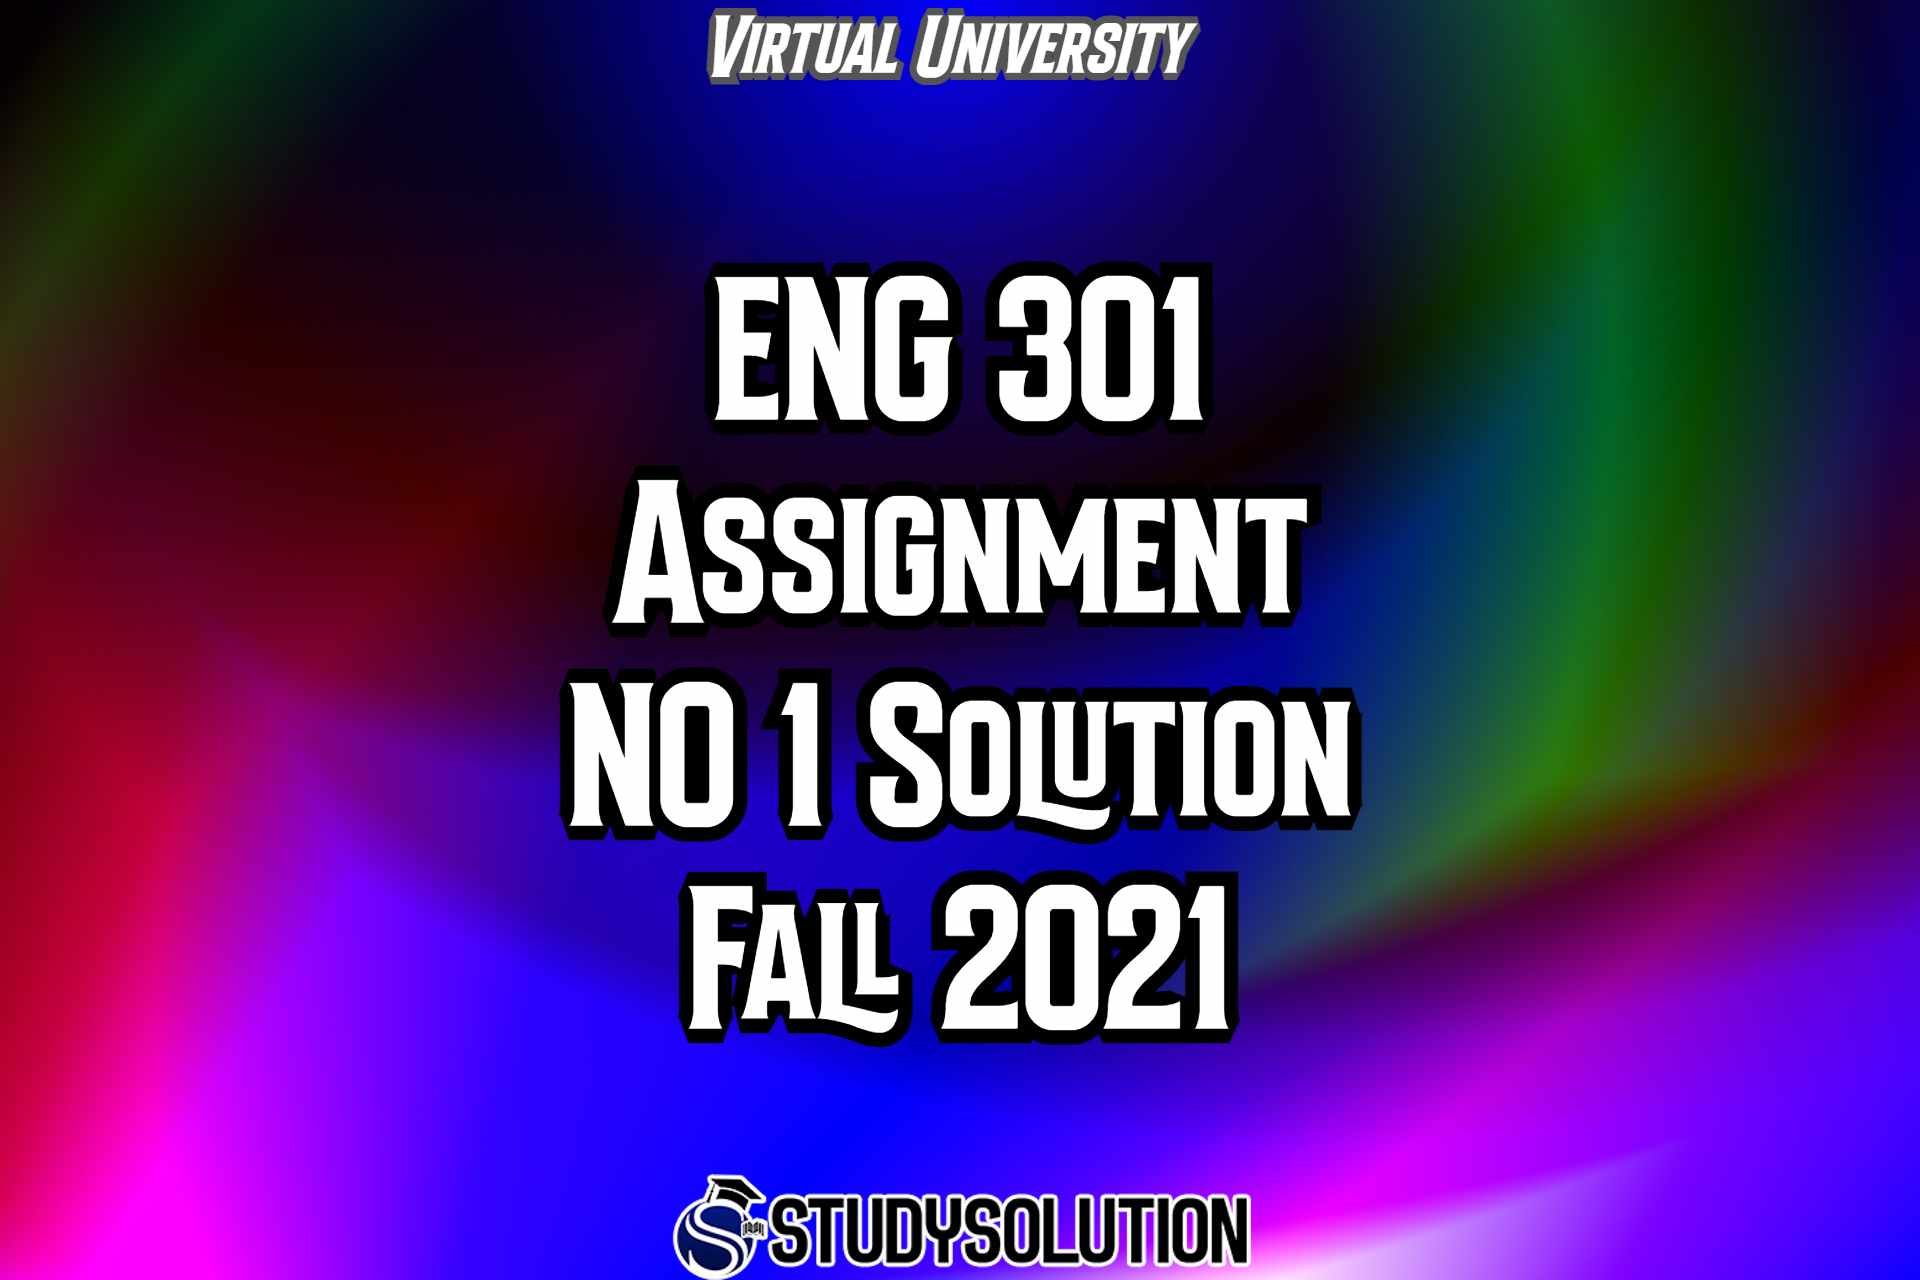 ENG301 Assignment NO 1 Solution Fall 2021